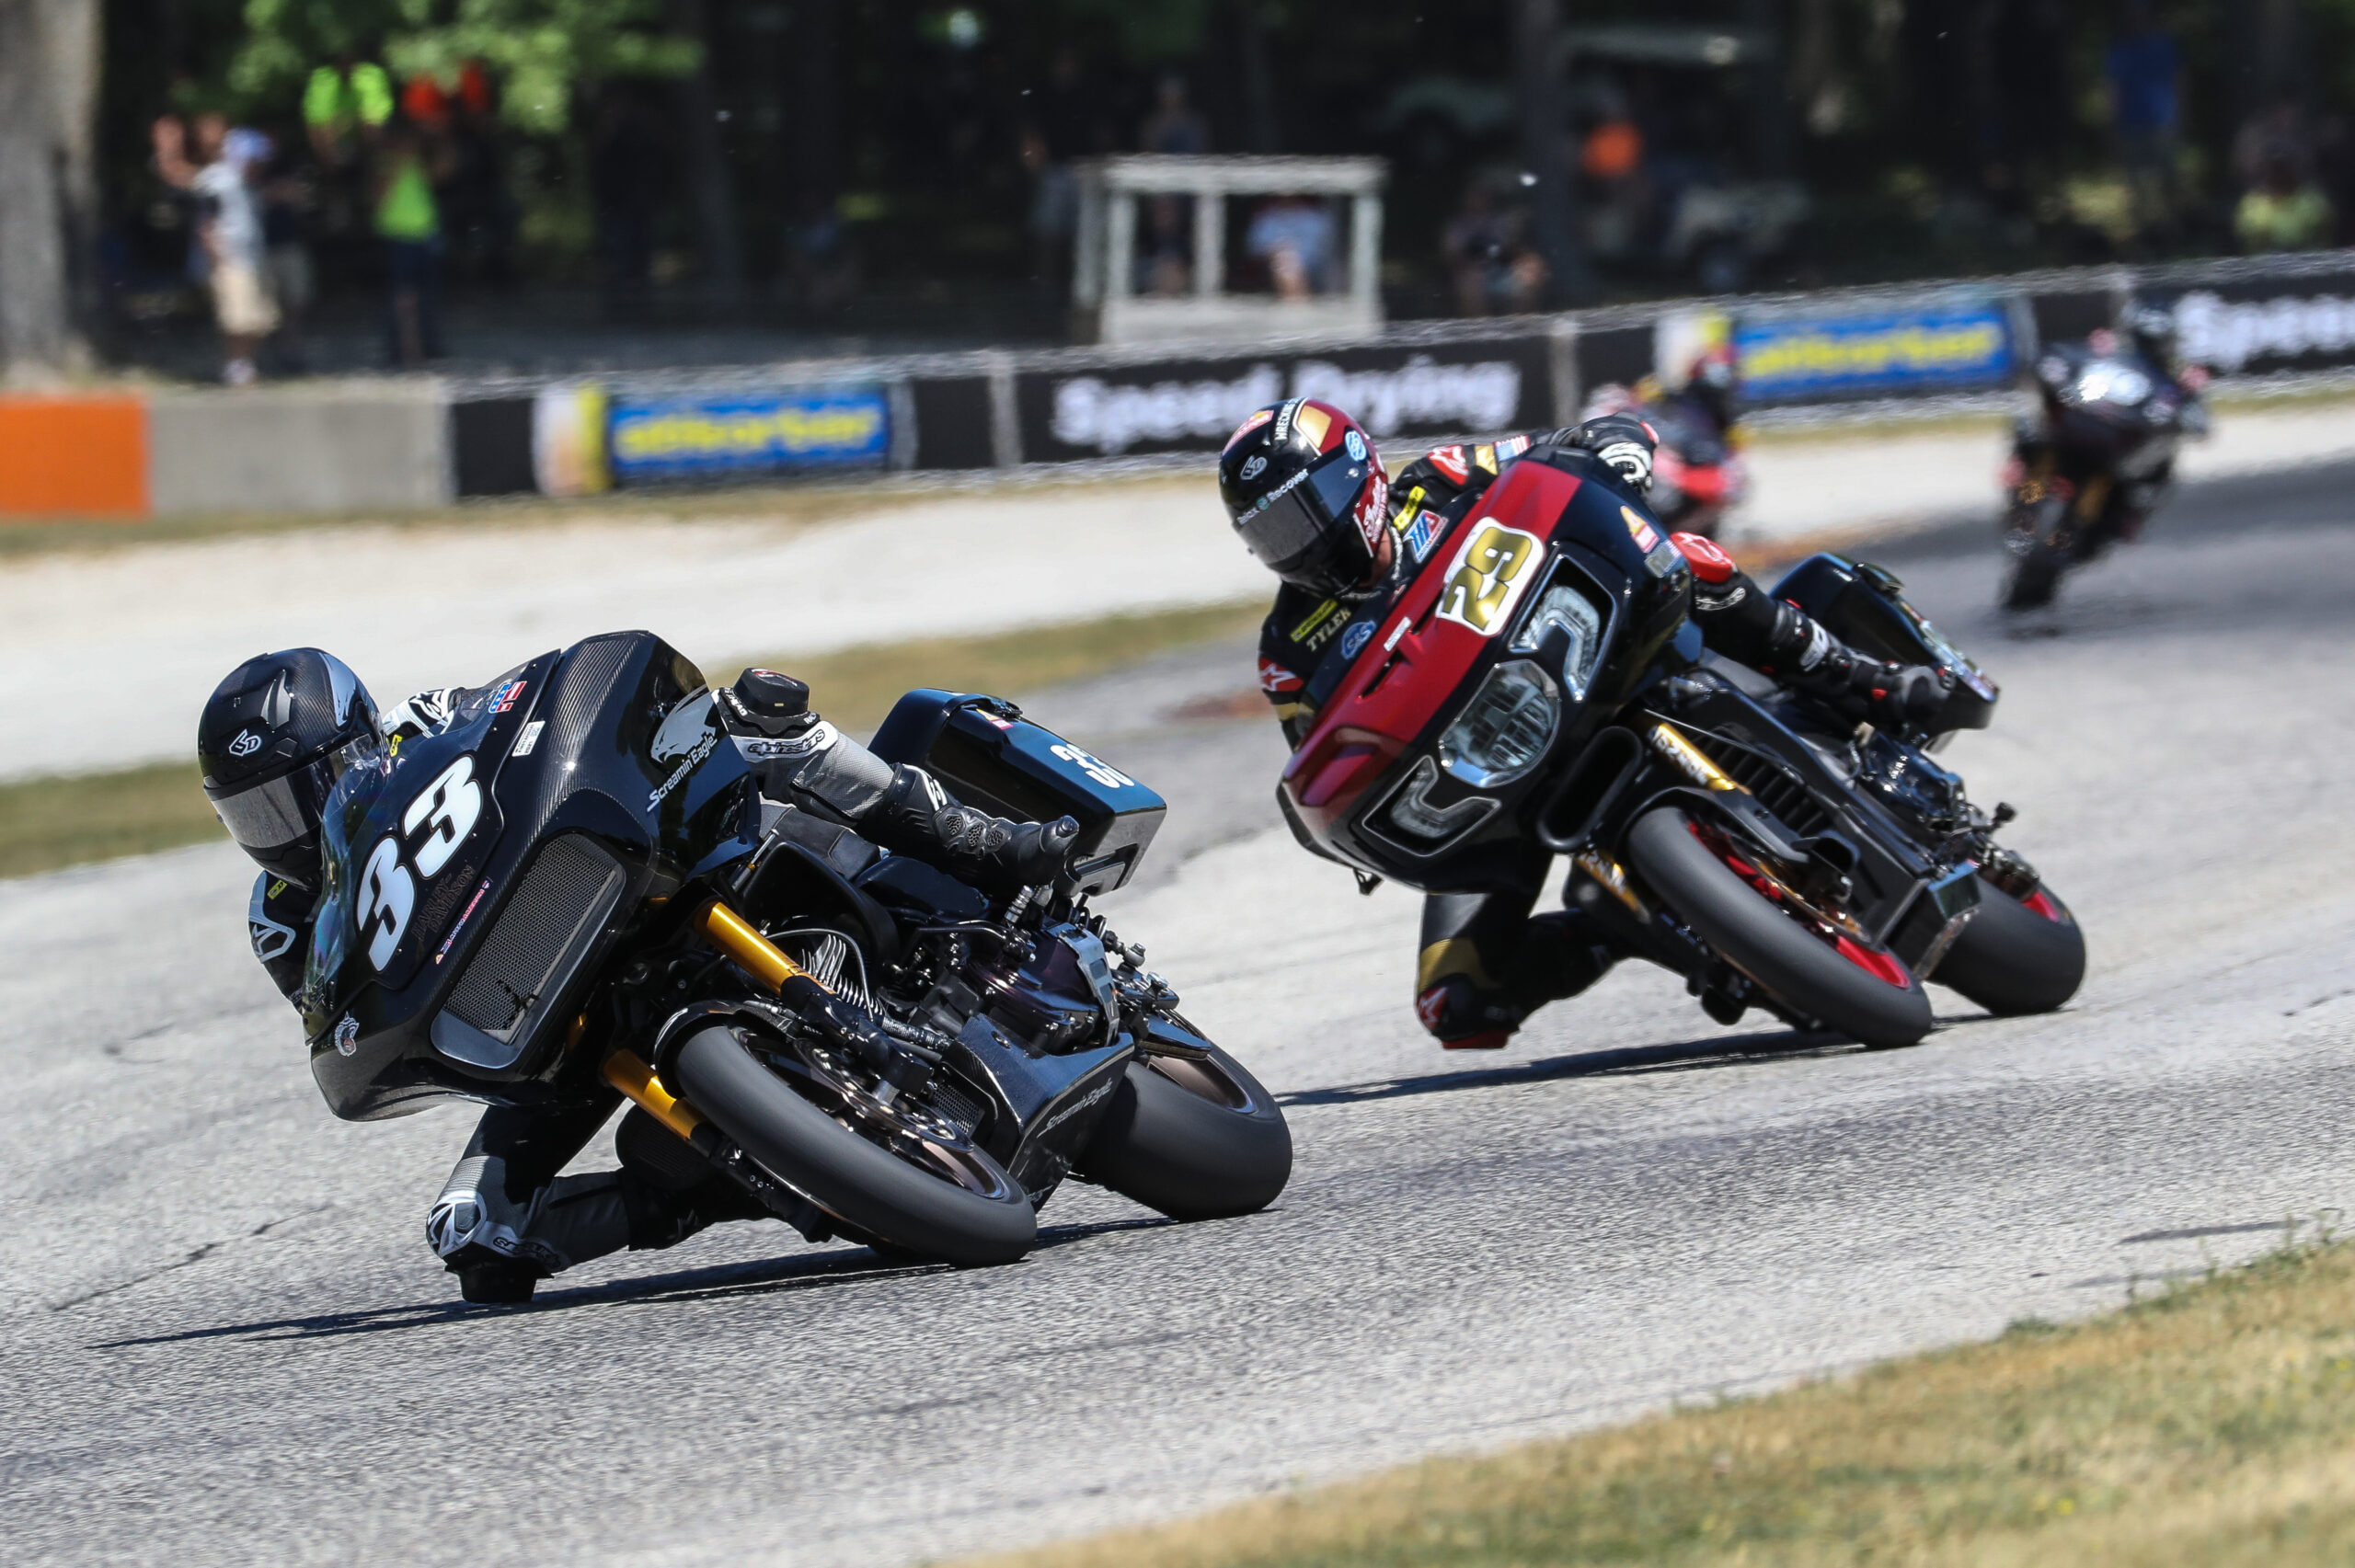 Mission Foods Is Back As Title Sponsor For 2022 King Of The Baggers Series  - MotoAmerica